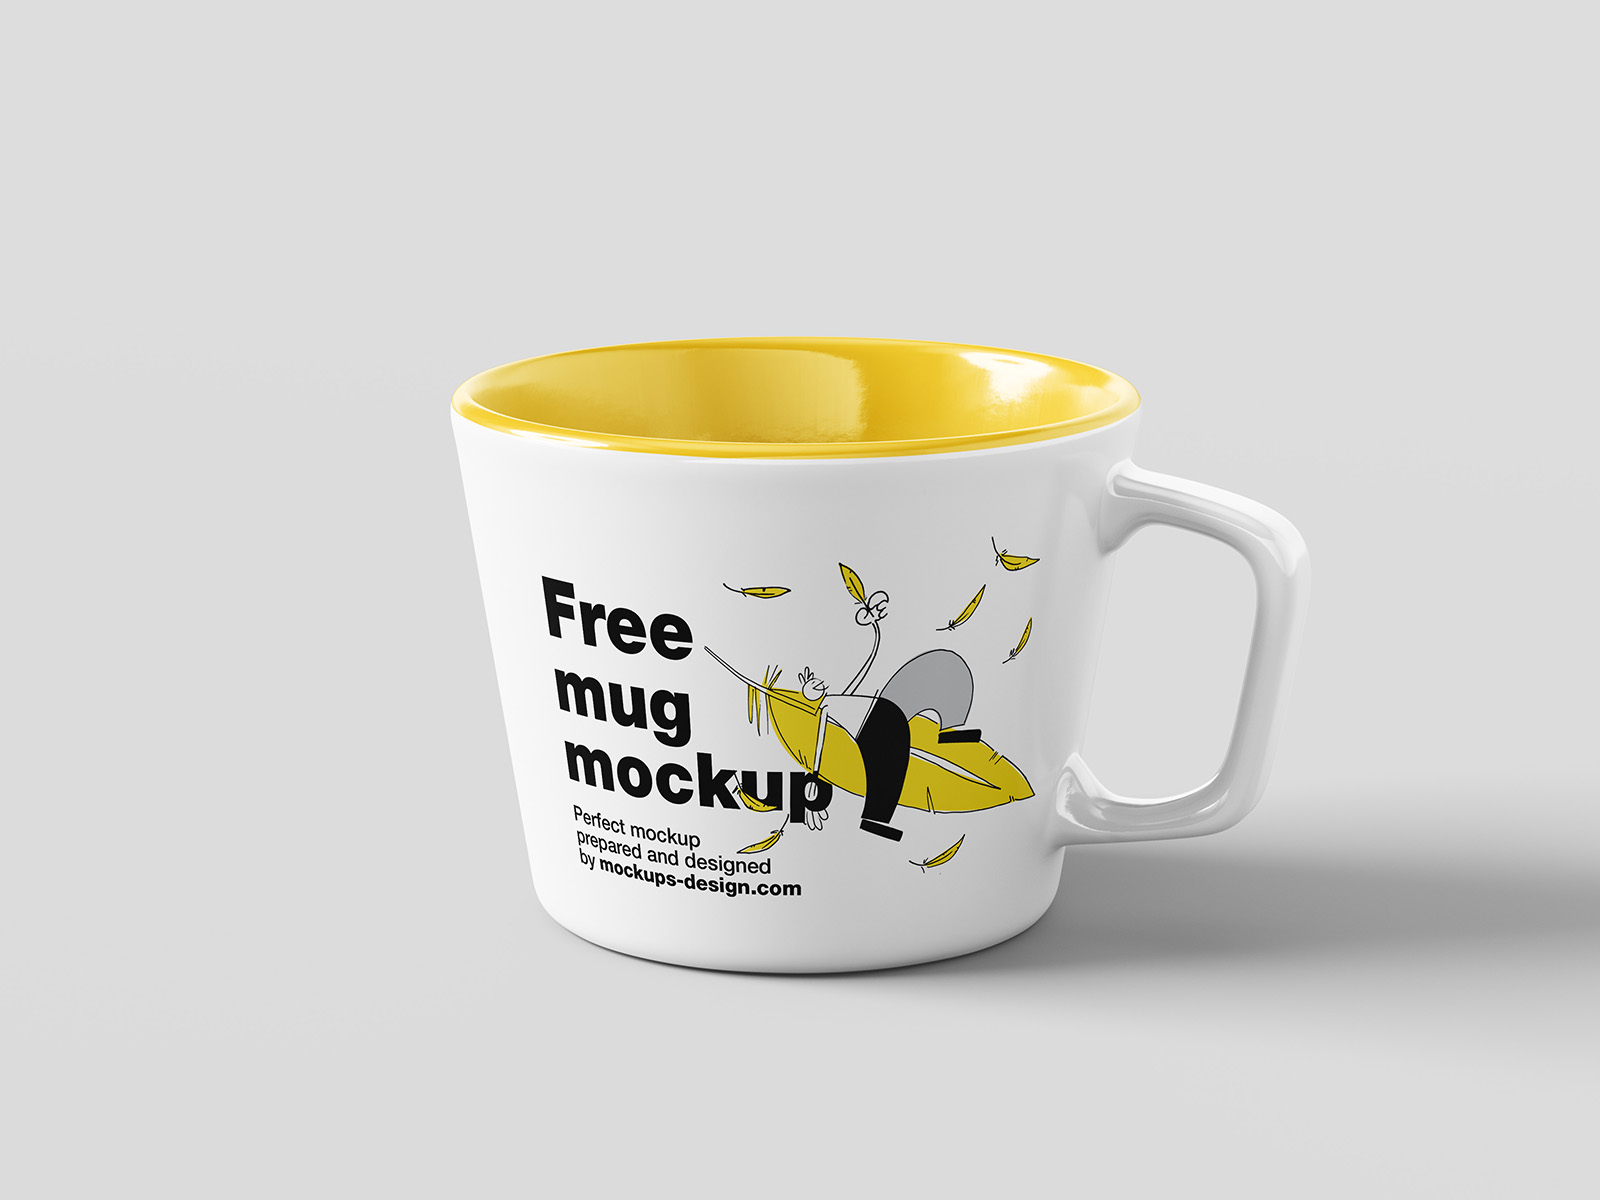 Low cup mockup